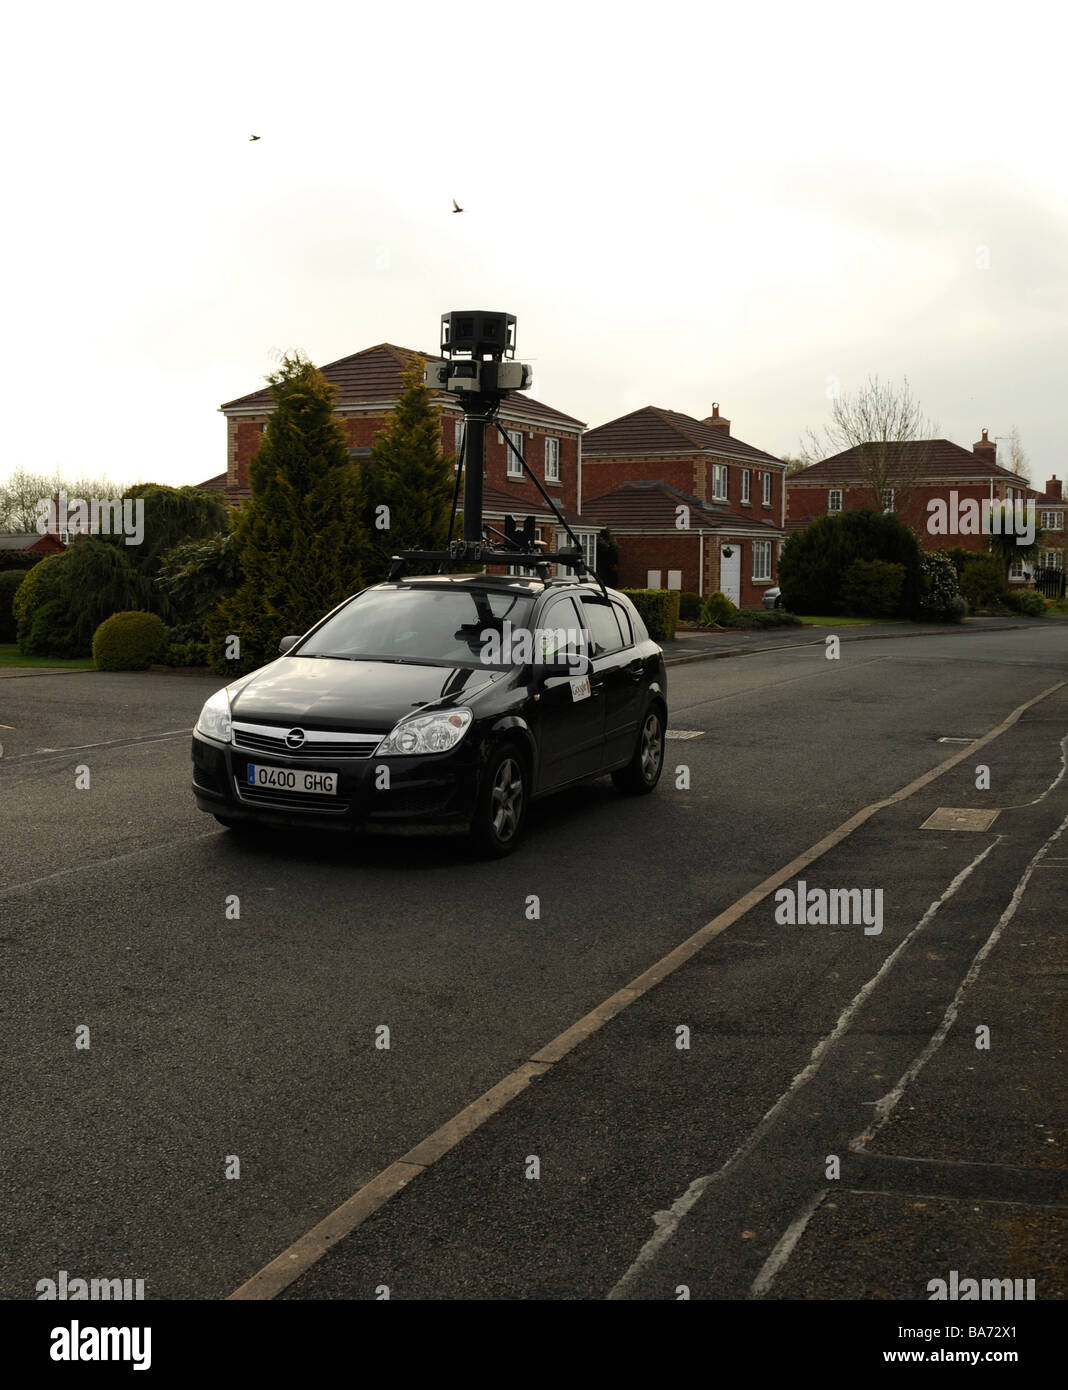 Google streetview car films in a residential street, Stock Photo